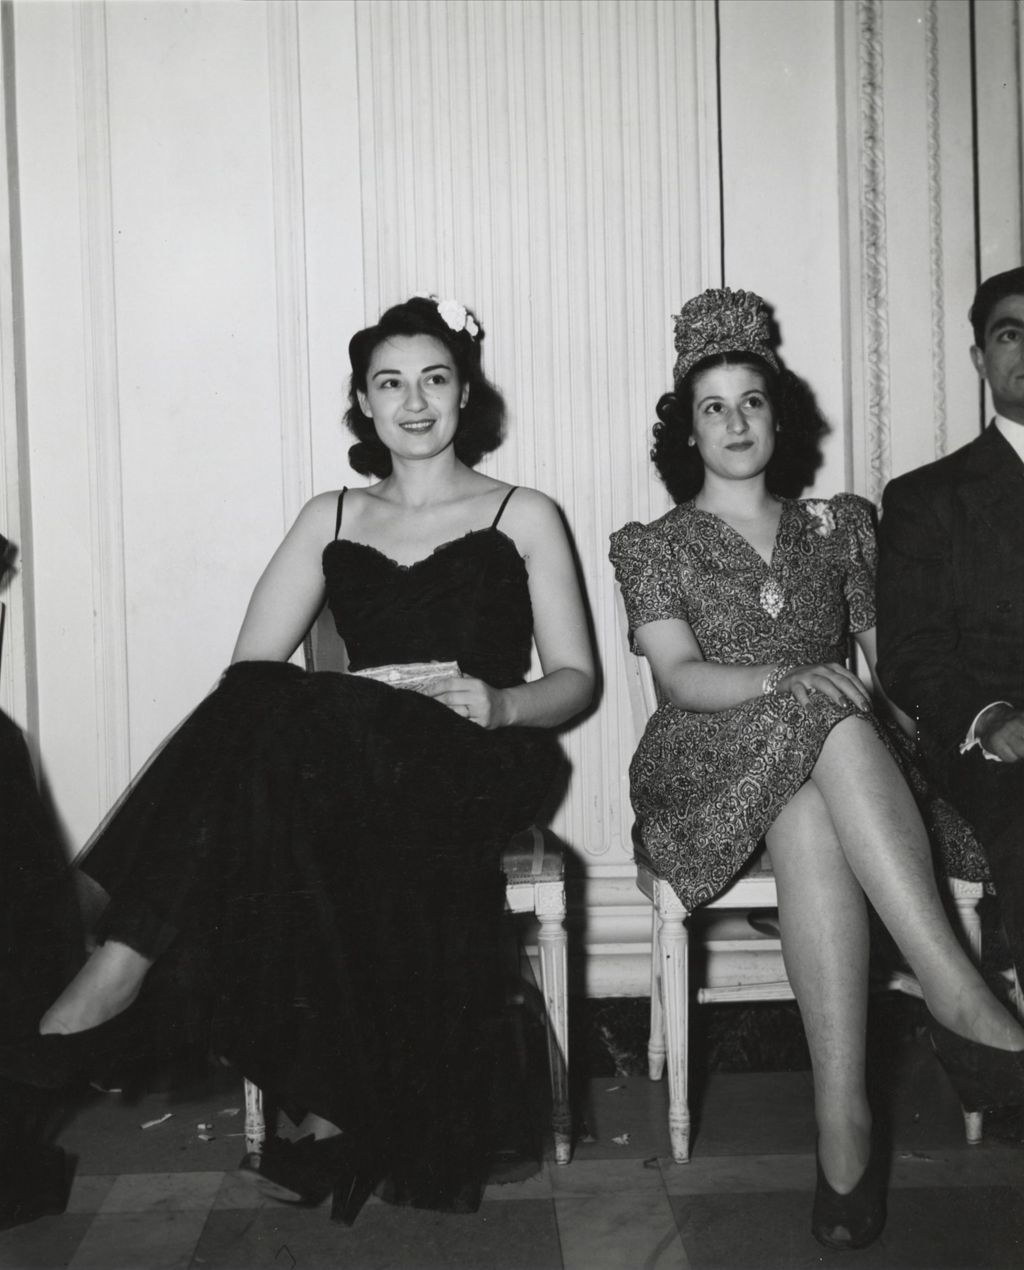 Attendees seated against the wall at the 1941 Lilac Ball at the Stevens Hotel